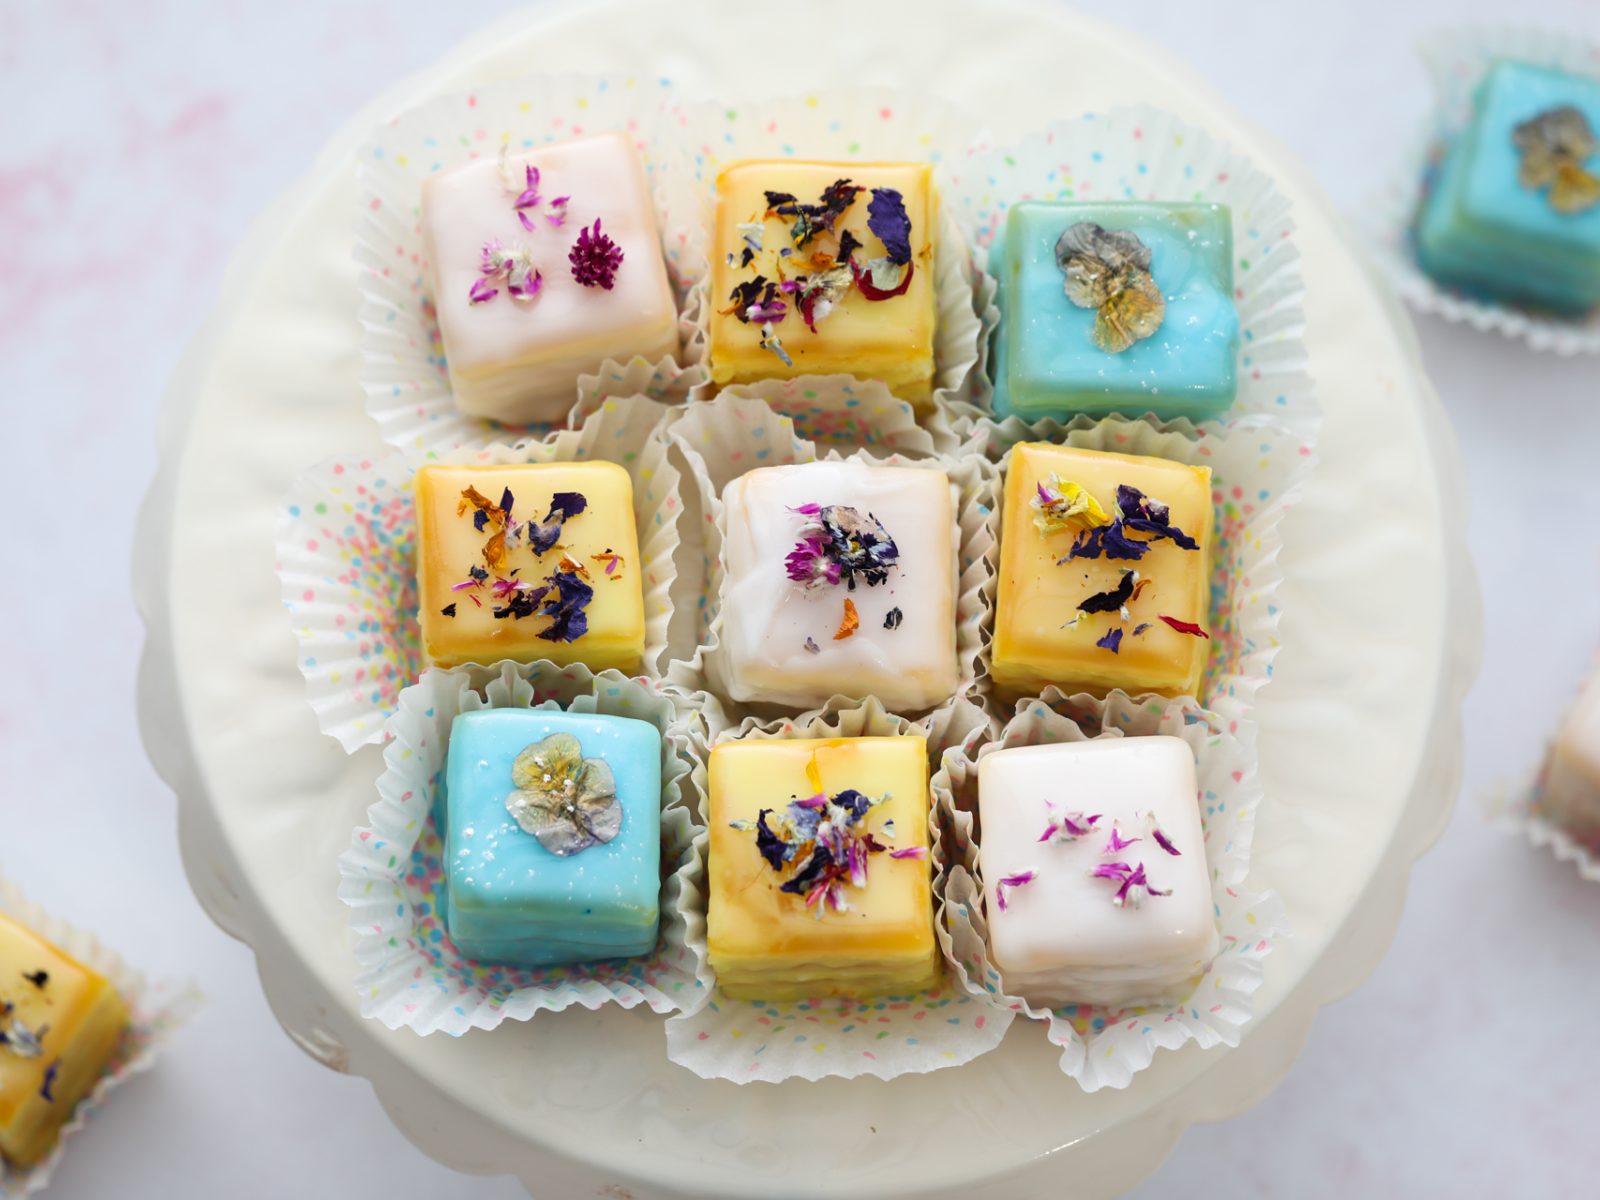 Almond Petits Fours Cake Recipe for Any Occasion – Swans Down® Cake Flour